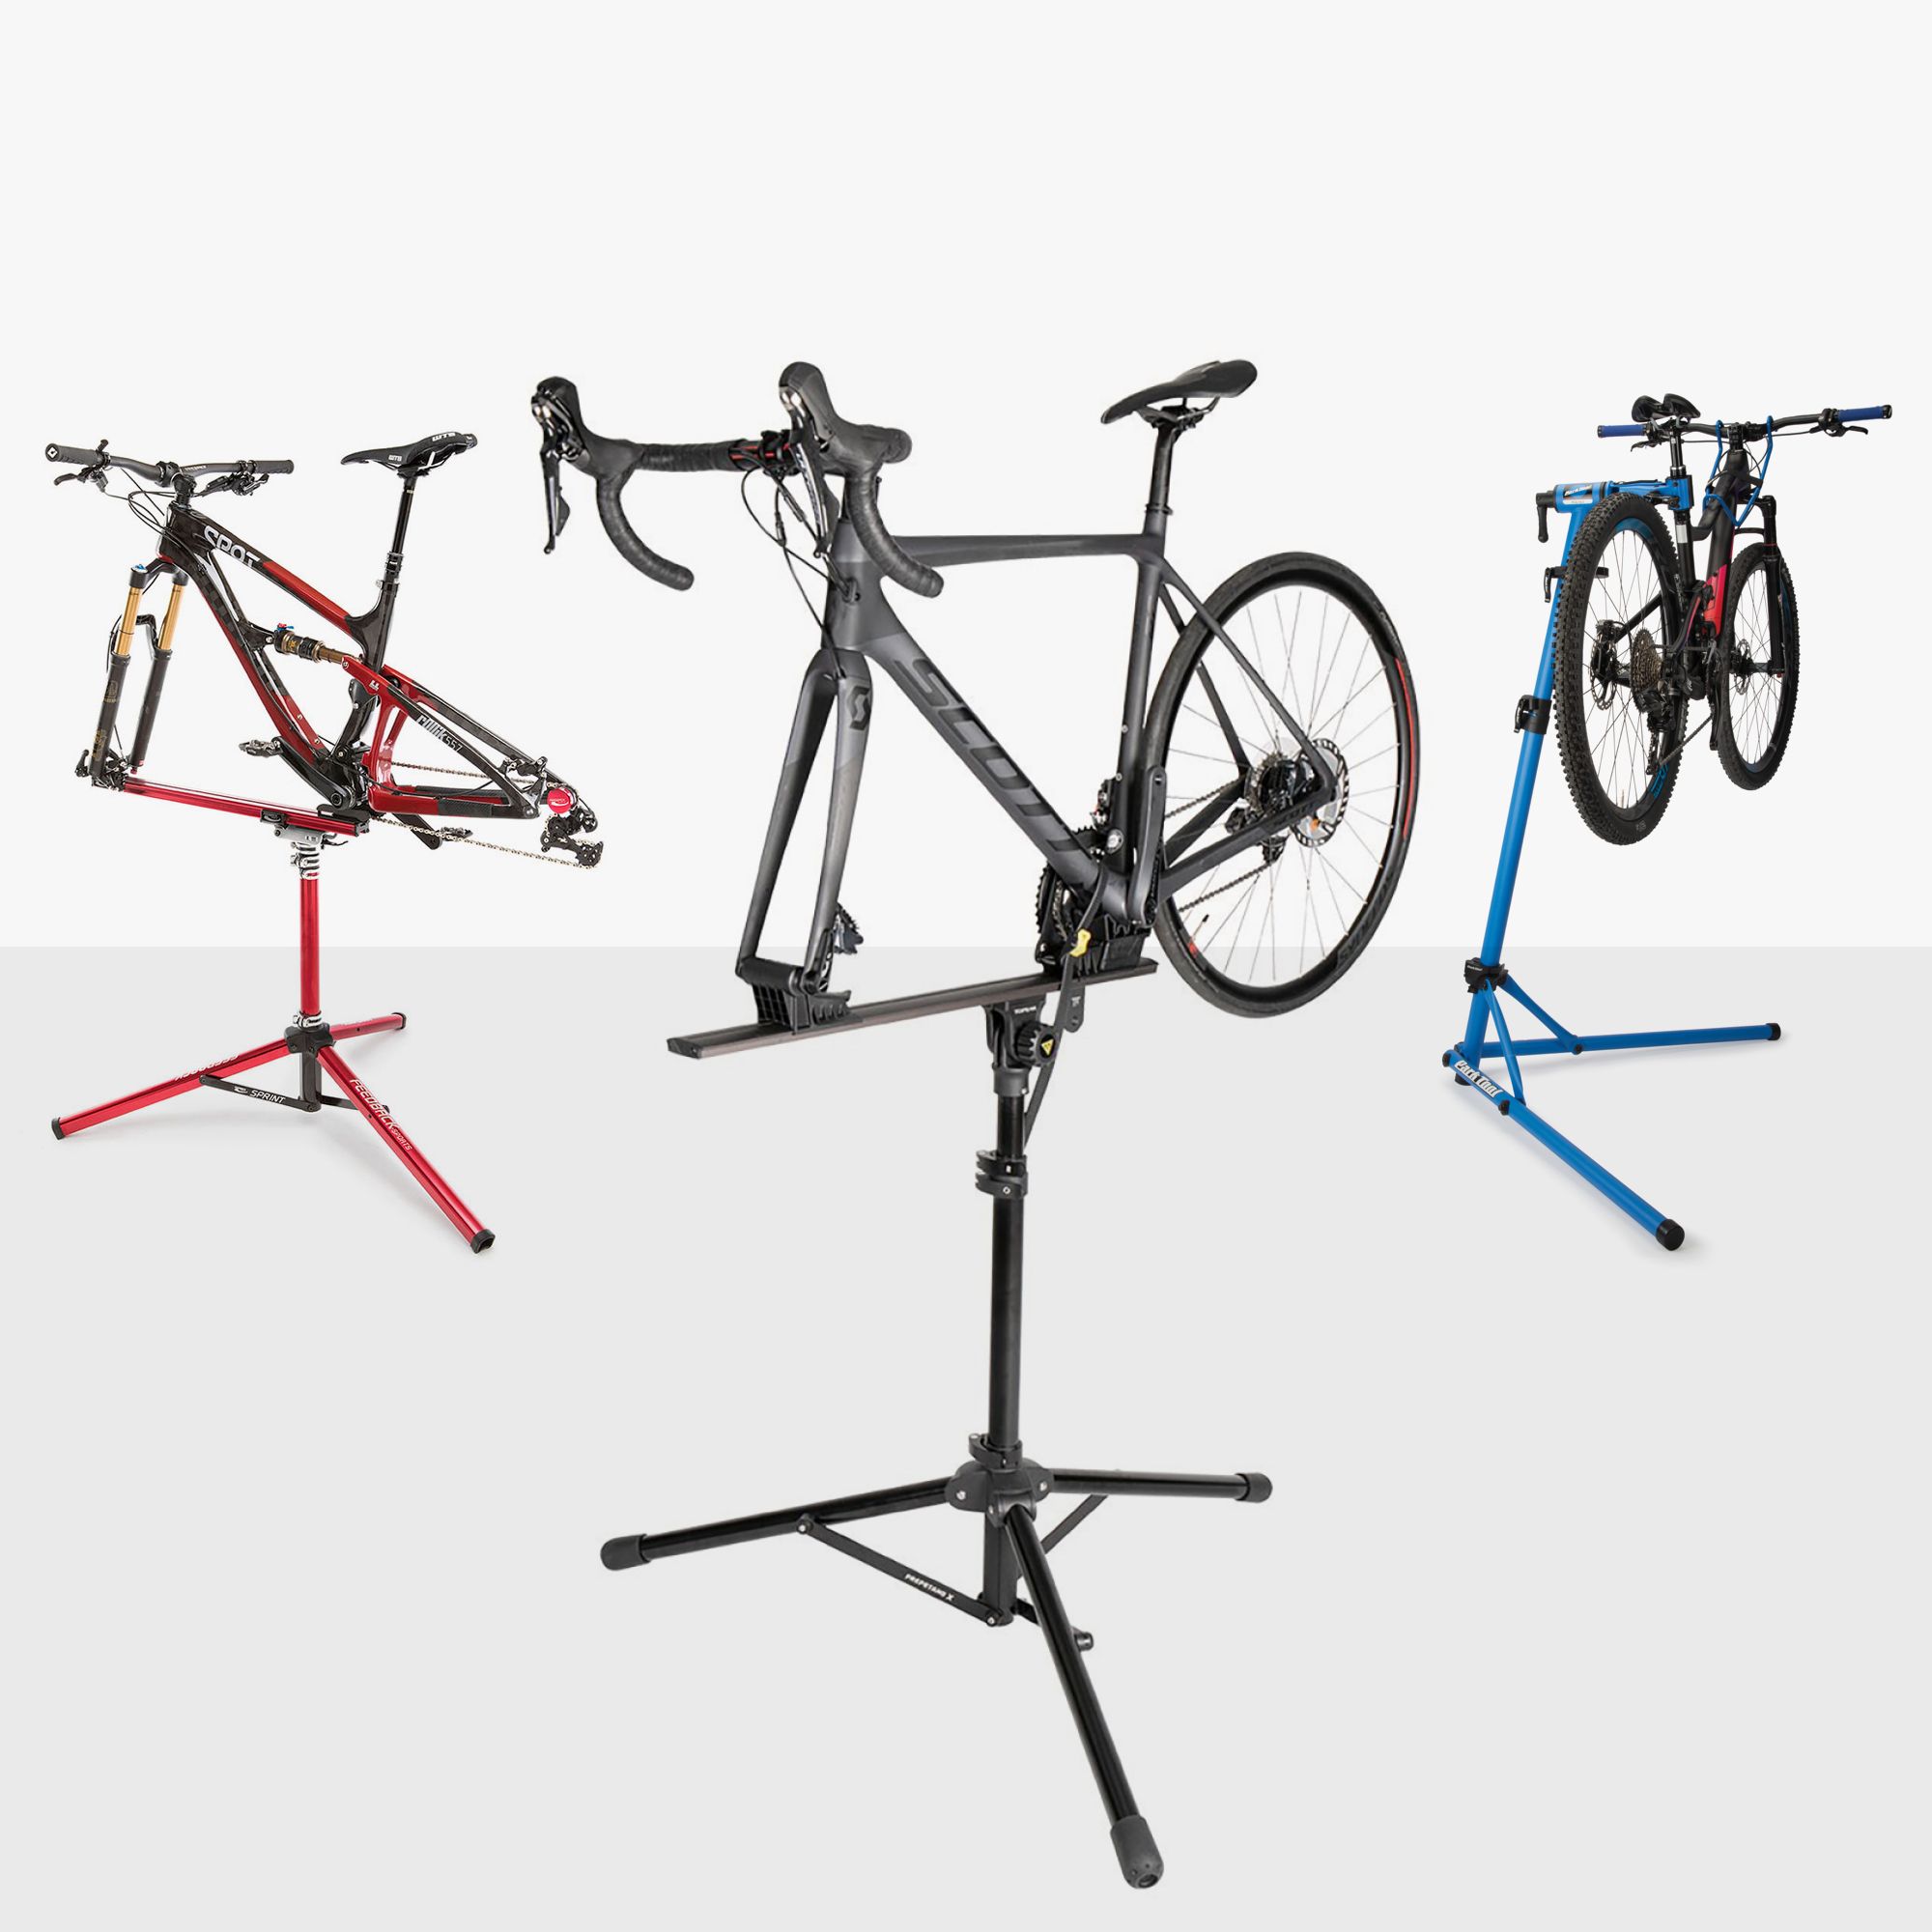 CLISPEED Bicycle Repair Mechanics Workstand Bike Support Holder Rack for Mountain Bikes and Road Bikes Maintenance 